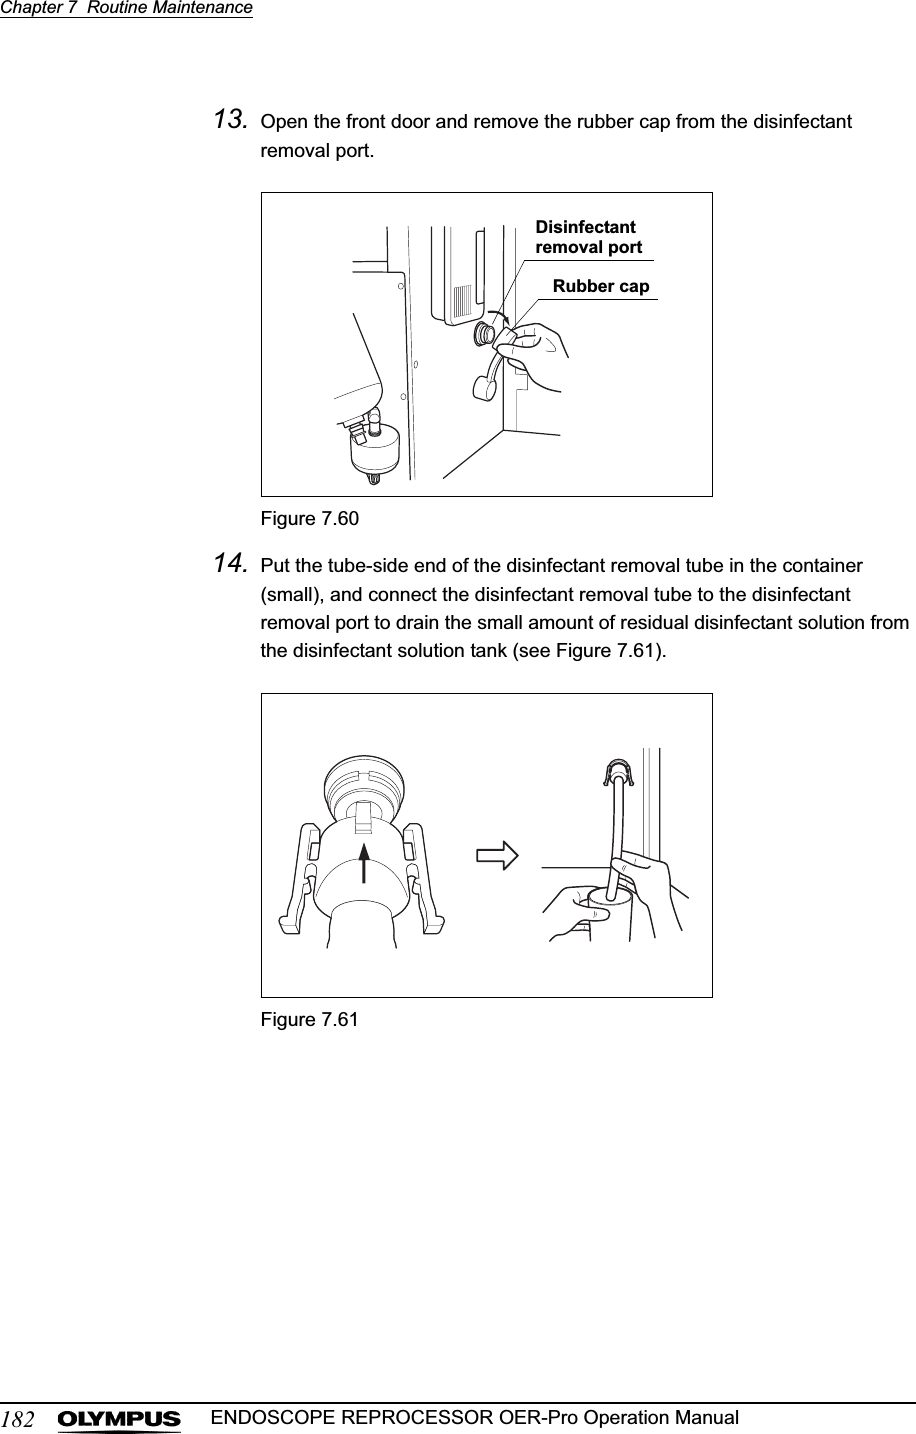 182Chapter 7  Routine MaintenanceENDOSCOPE REPROCESSOR OER-Pro Operation Manual13. Open the front door and remove the rubber cap from the disinfectant removal port.Figure 7.6014. Put the tube-side end of the disinfectant removal tube in the container (small), and connect the disinfectant removal tube to the disinfectant removal port to drain the small amount of residual disinfectant solution from the disinfectant solution tank (see Figure 7.61).Figure 7.61Disinfectant removal portRubber cap